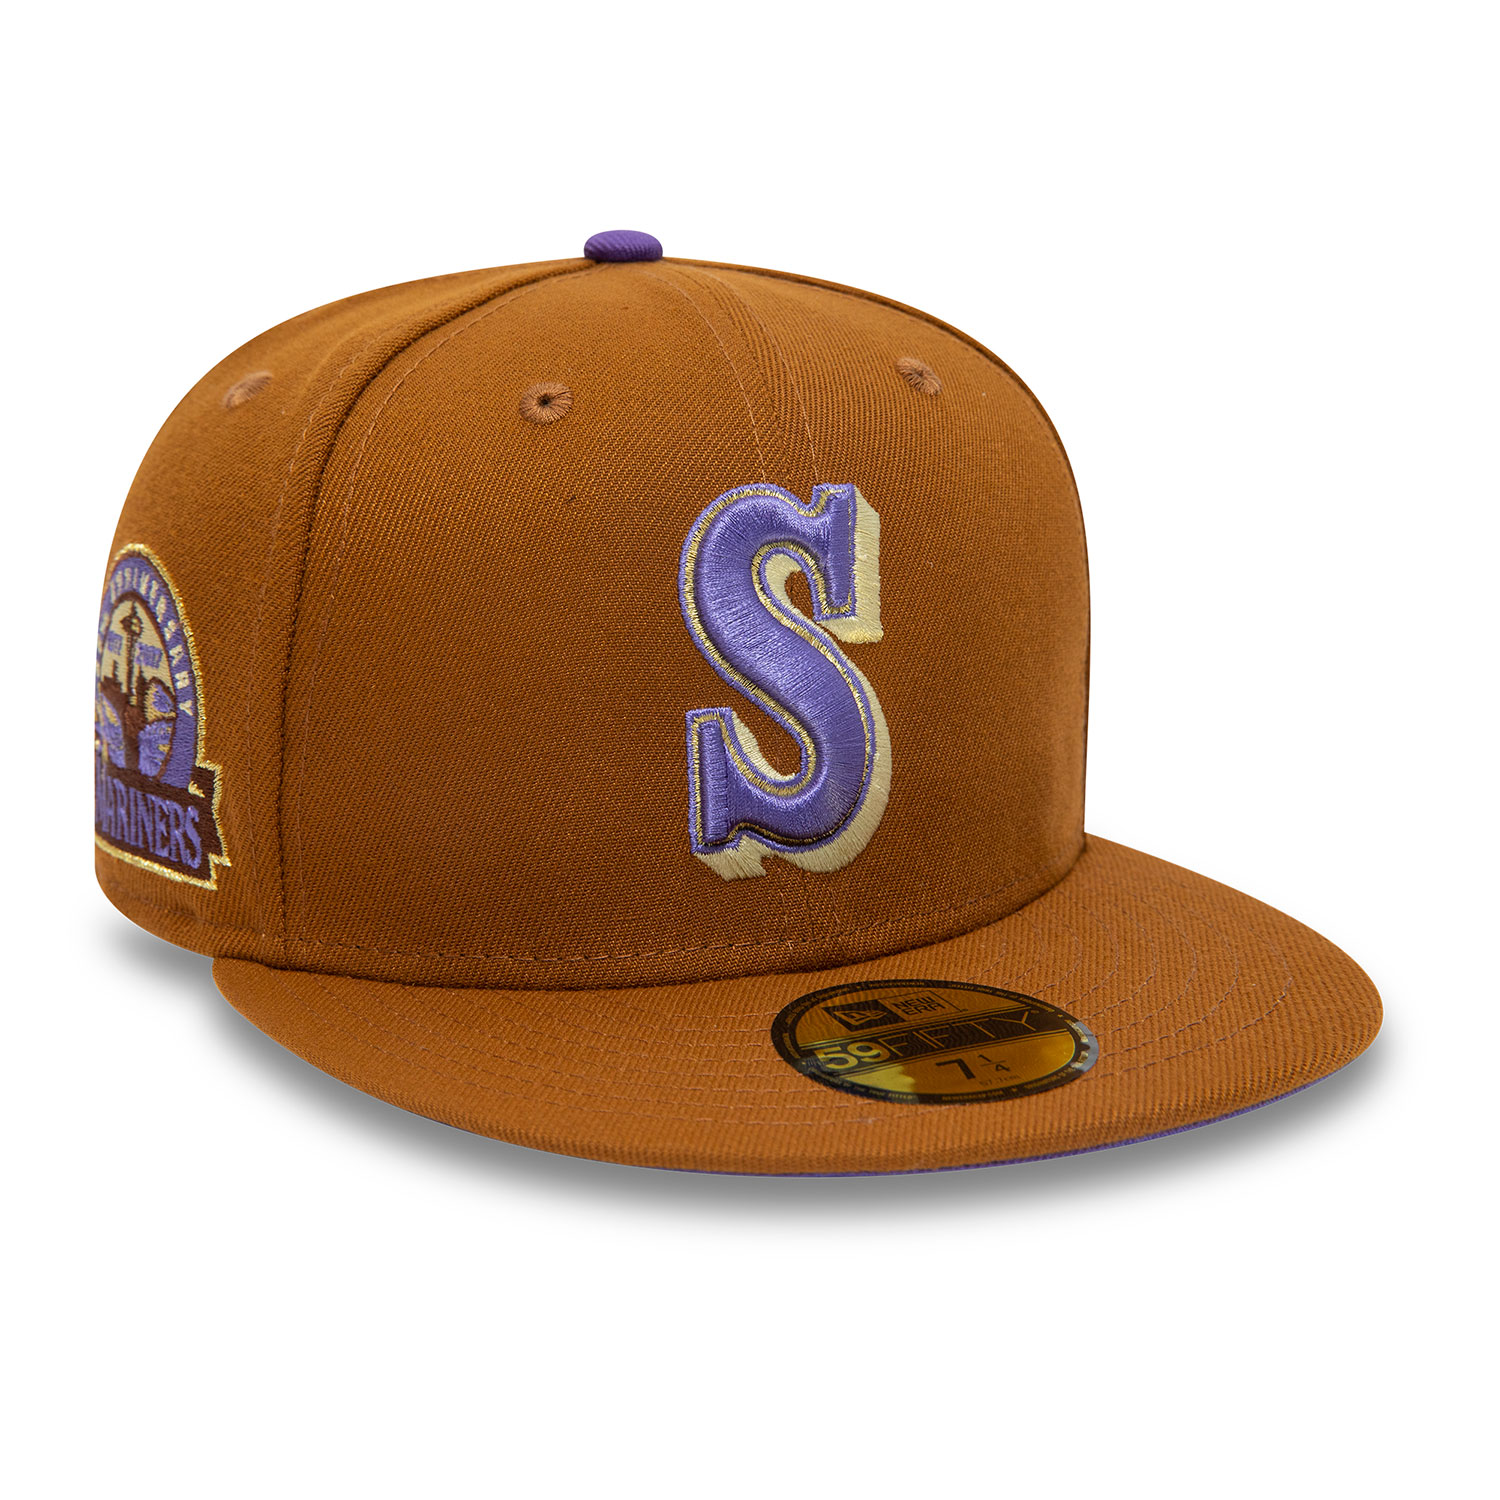 Official Seattle Mariners Cooperstown Collection Gear, Vintage